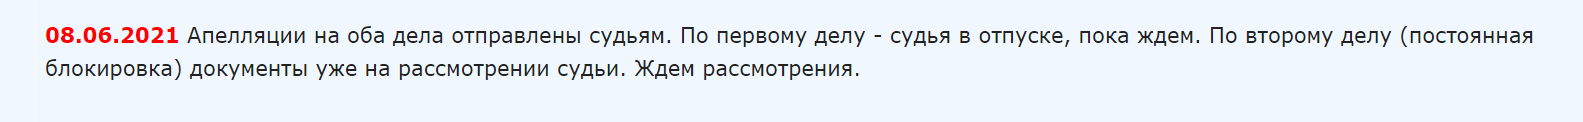 Continuation of the post The w3bsit3-dns.com administration asks for the help of lawyers - Blocking, W3bsit3-dns.com, Negative, Match TV, Roskomnadzor, Reply to post